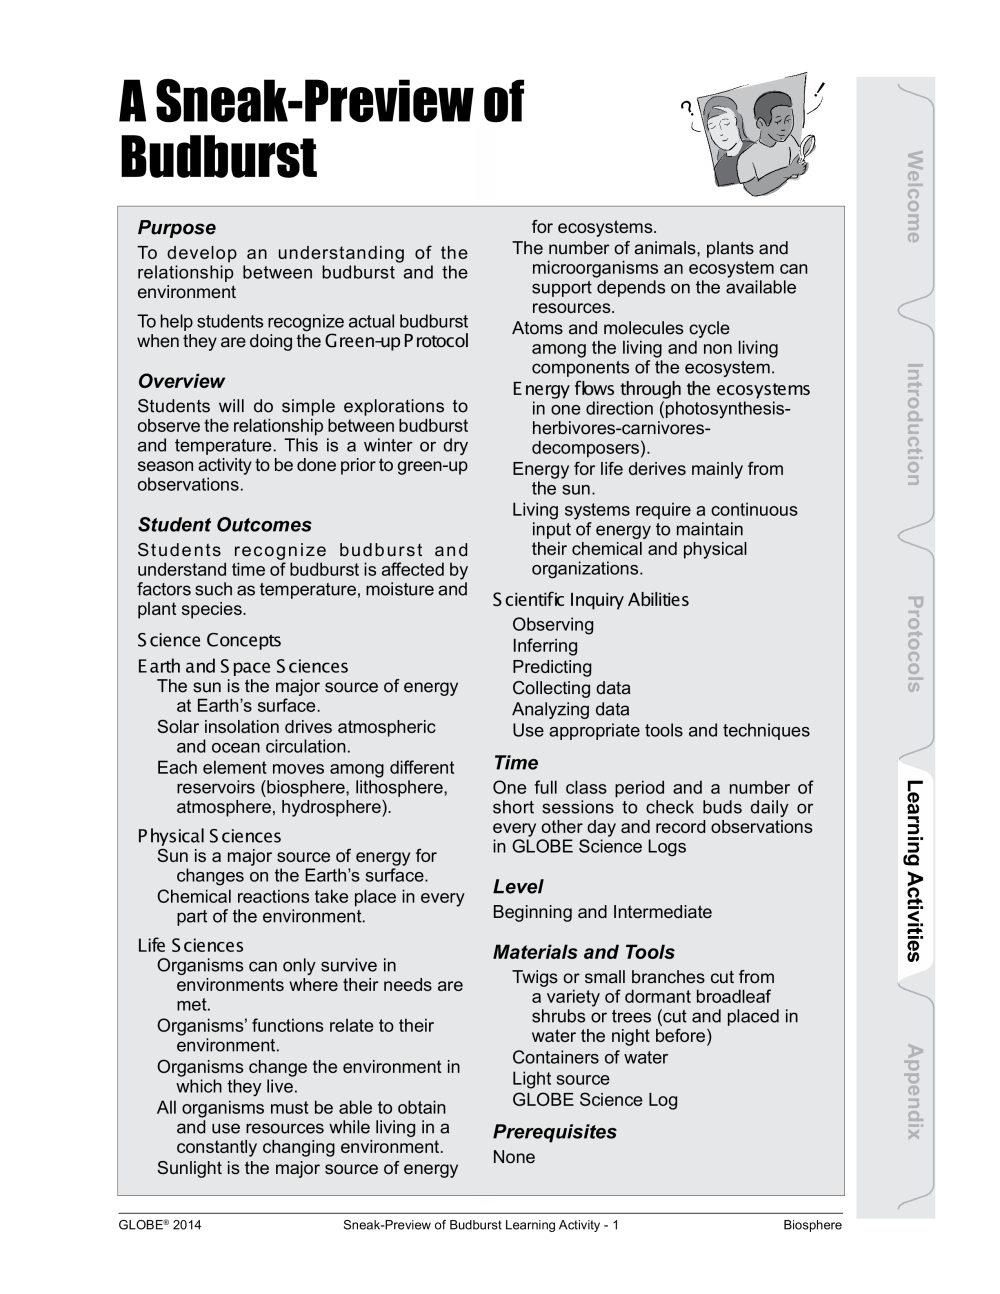 Learning Activities preview for P2 A sneak preview of Budburst (pdf)